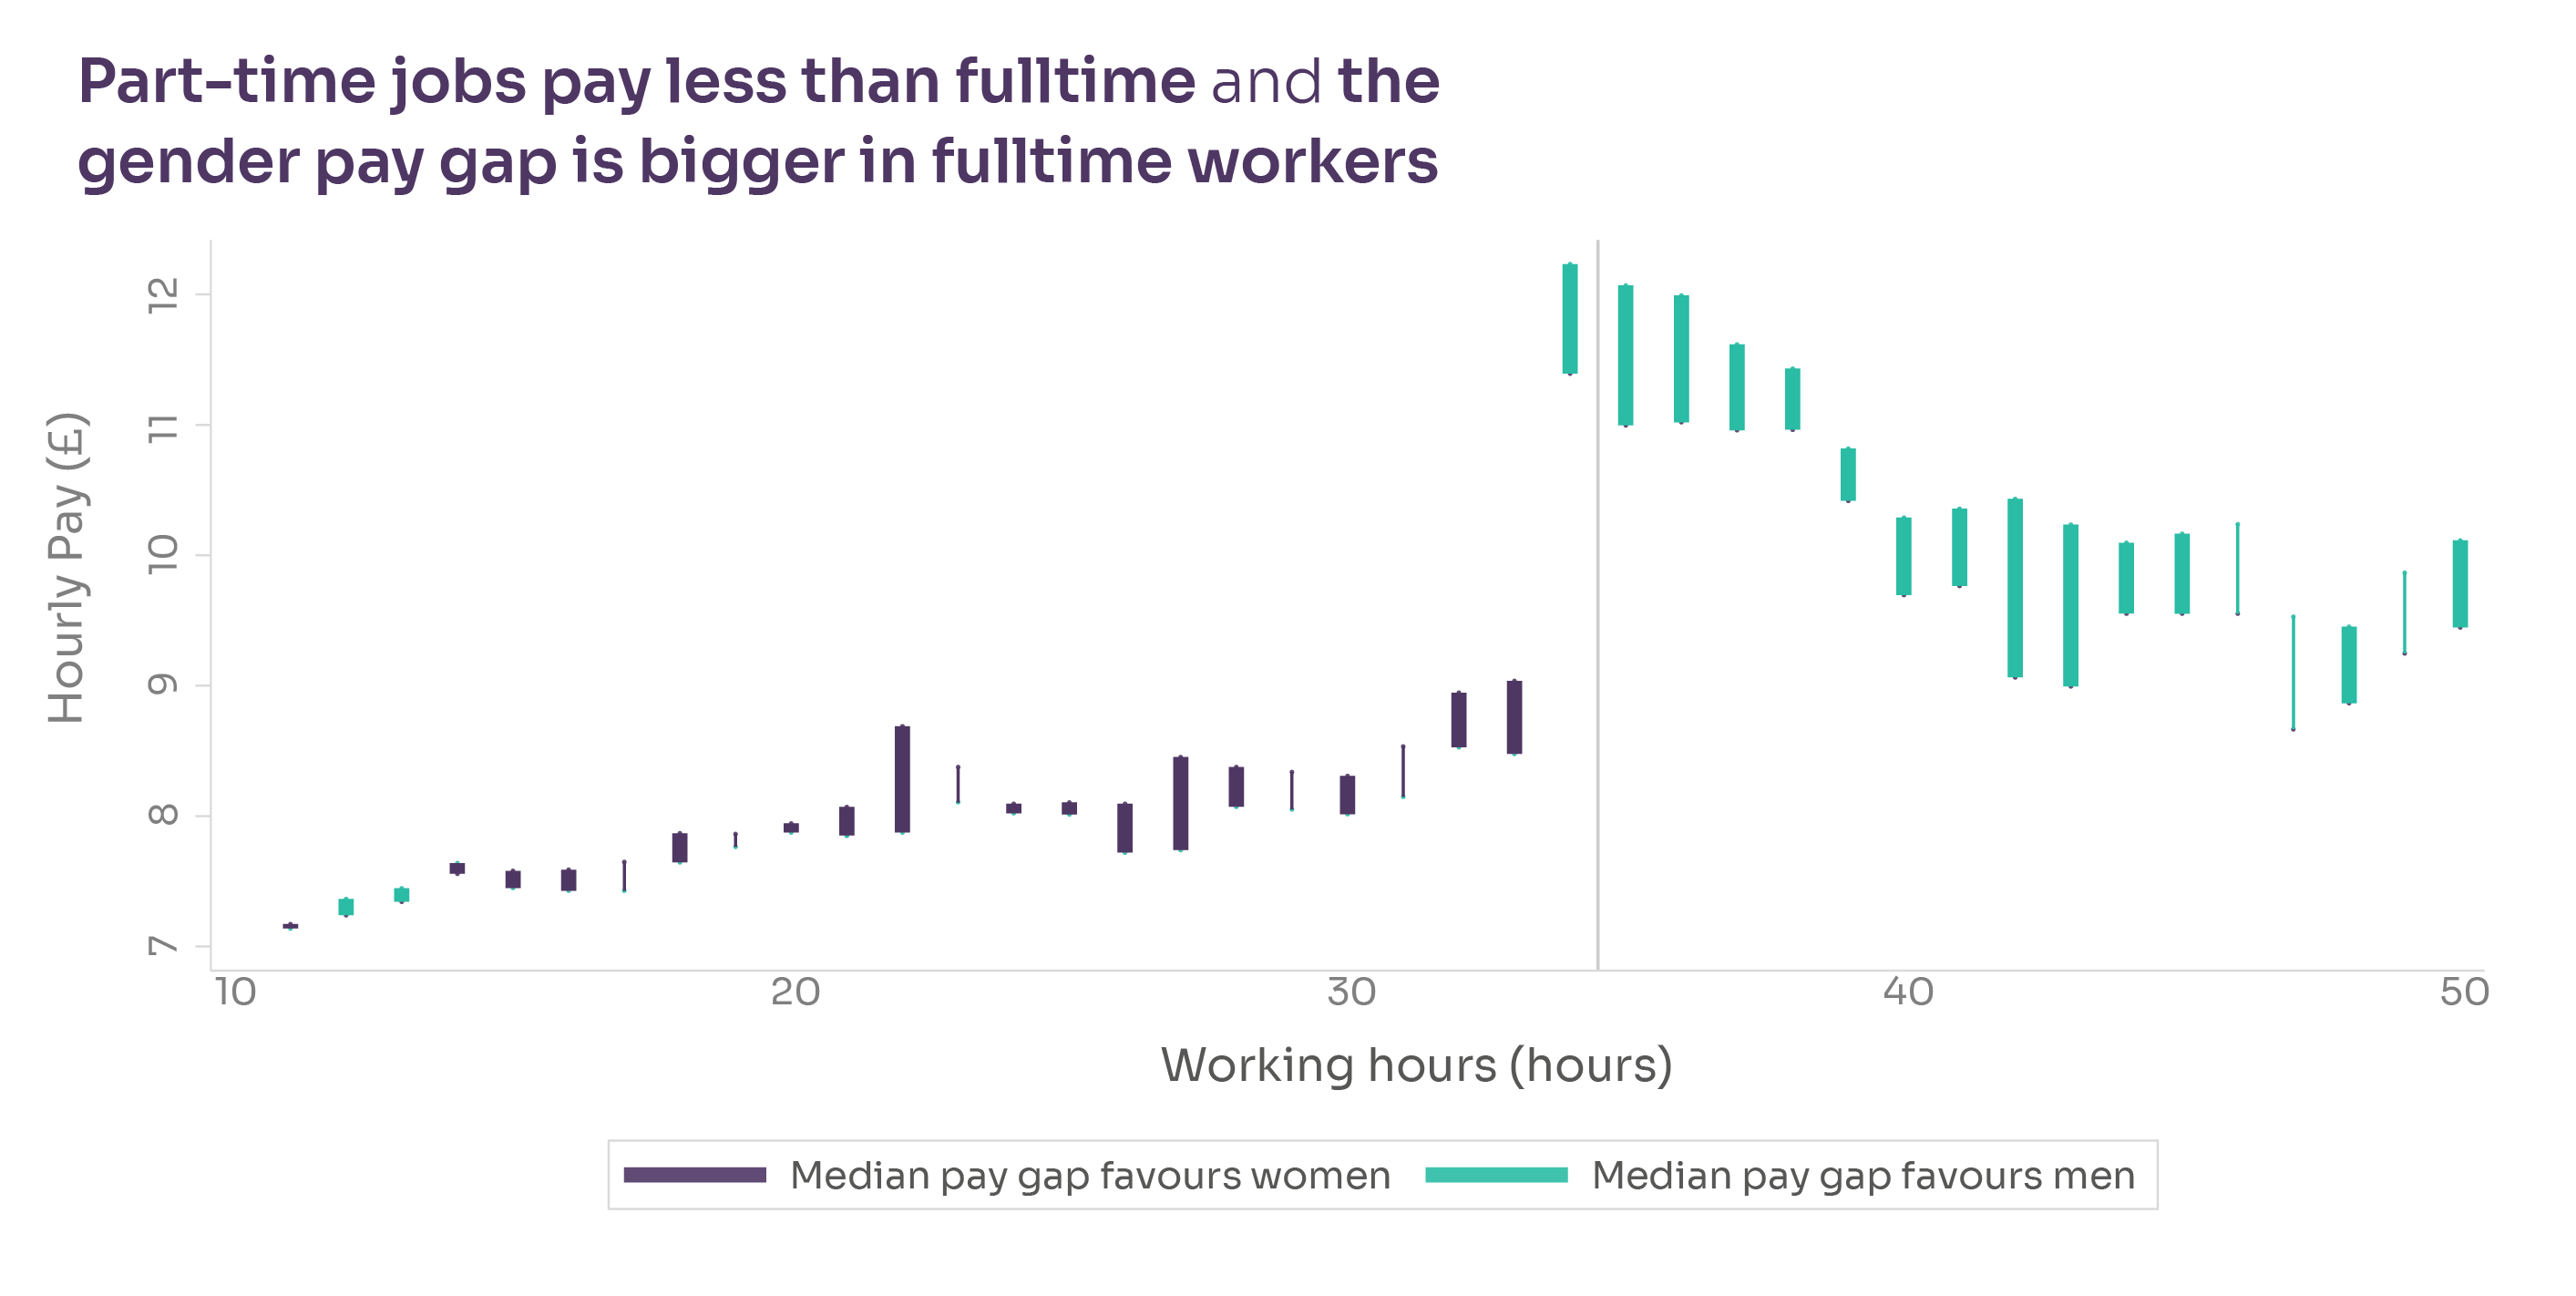 Chart: Part-time job pay less than fulltime and the gender pay gap is bigger in fulltime workers